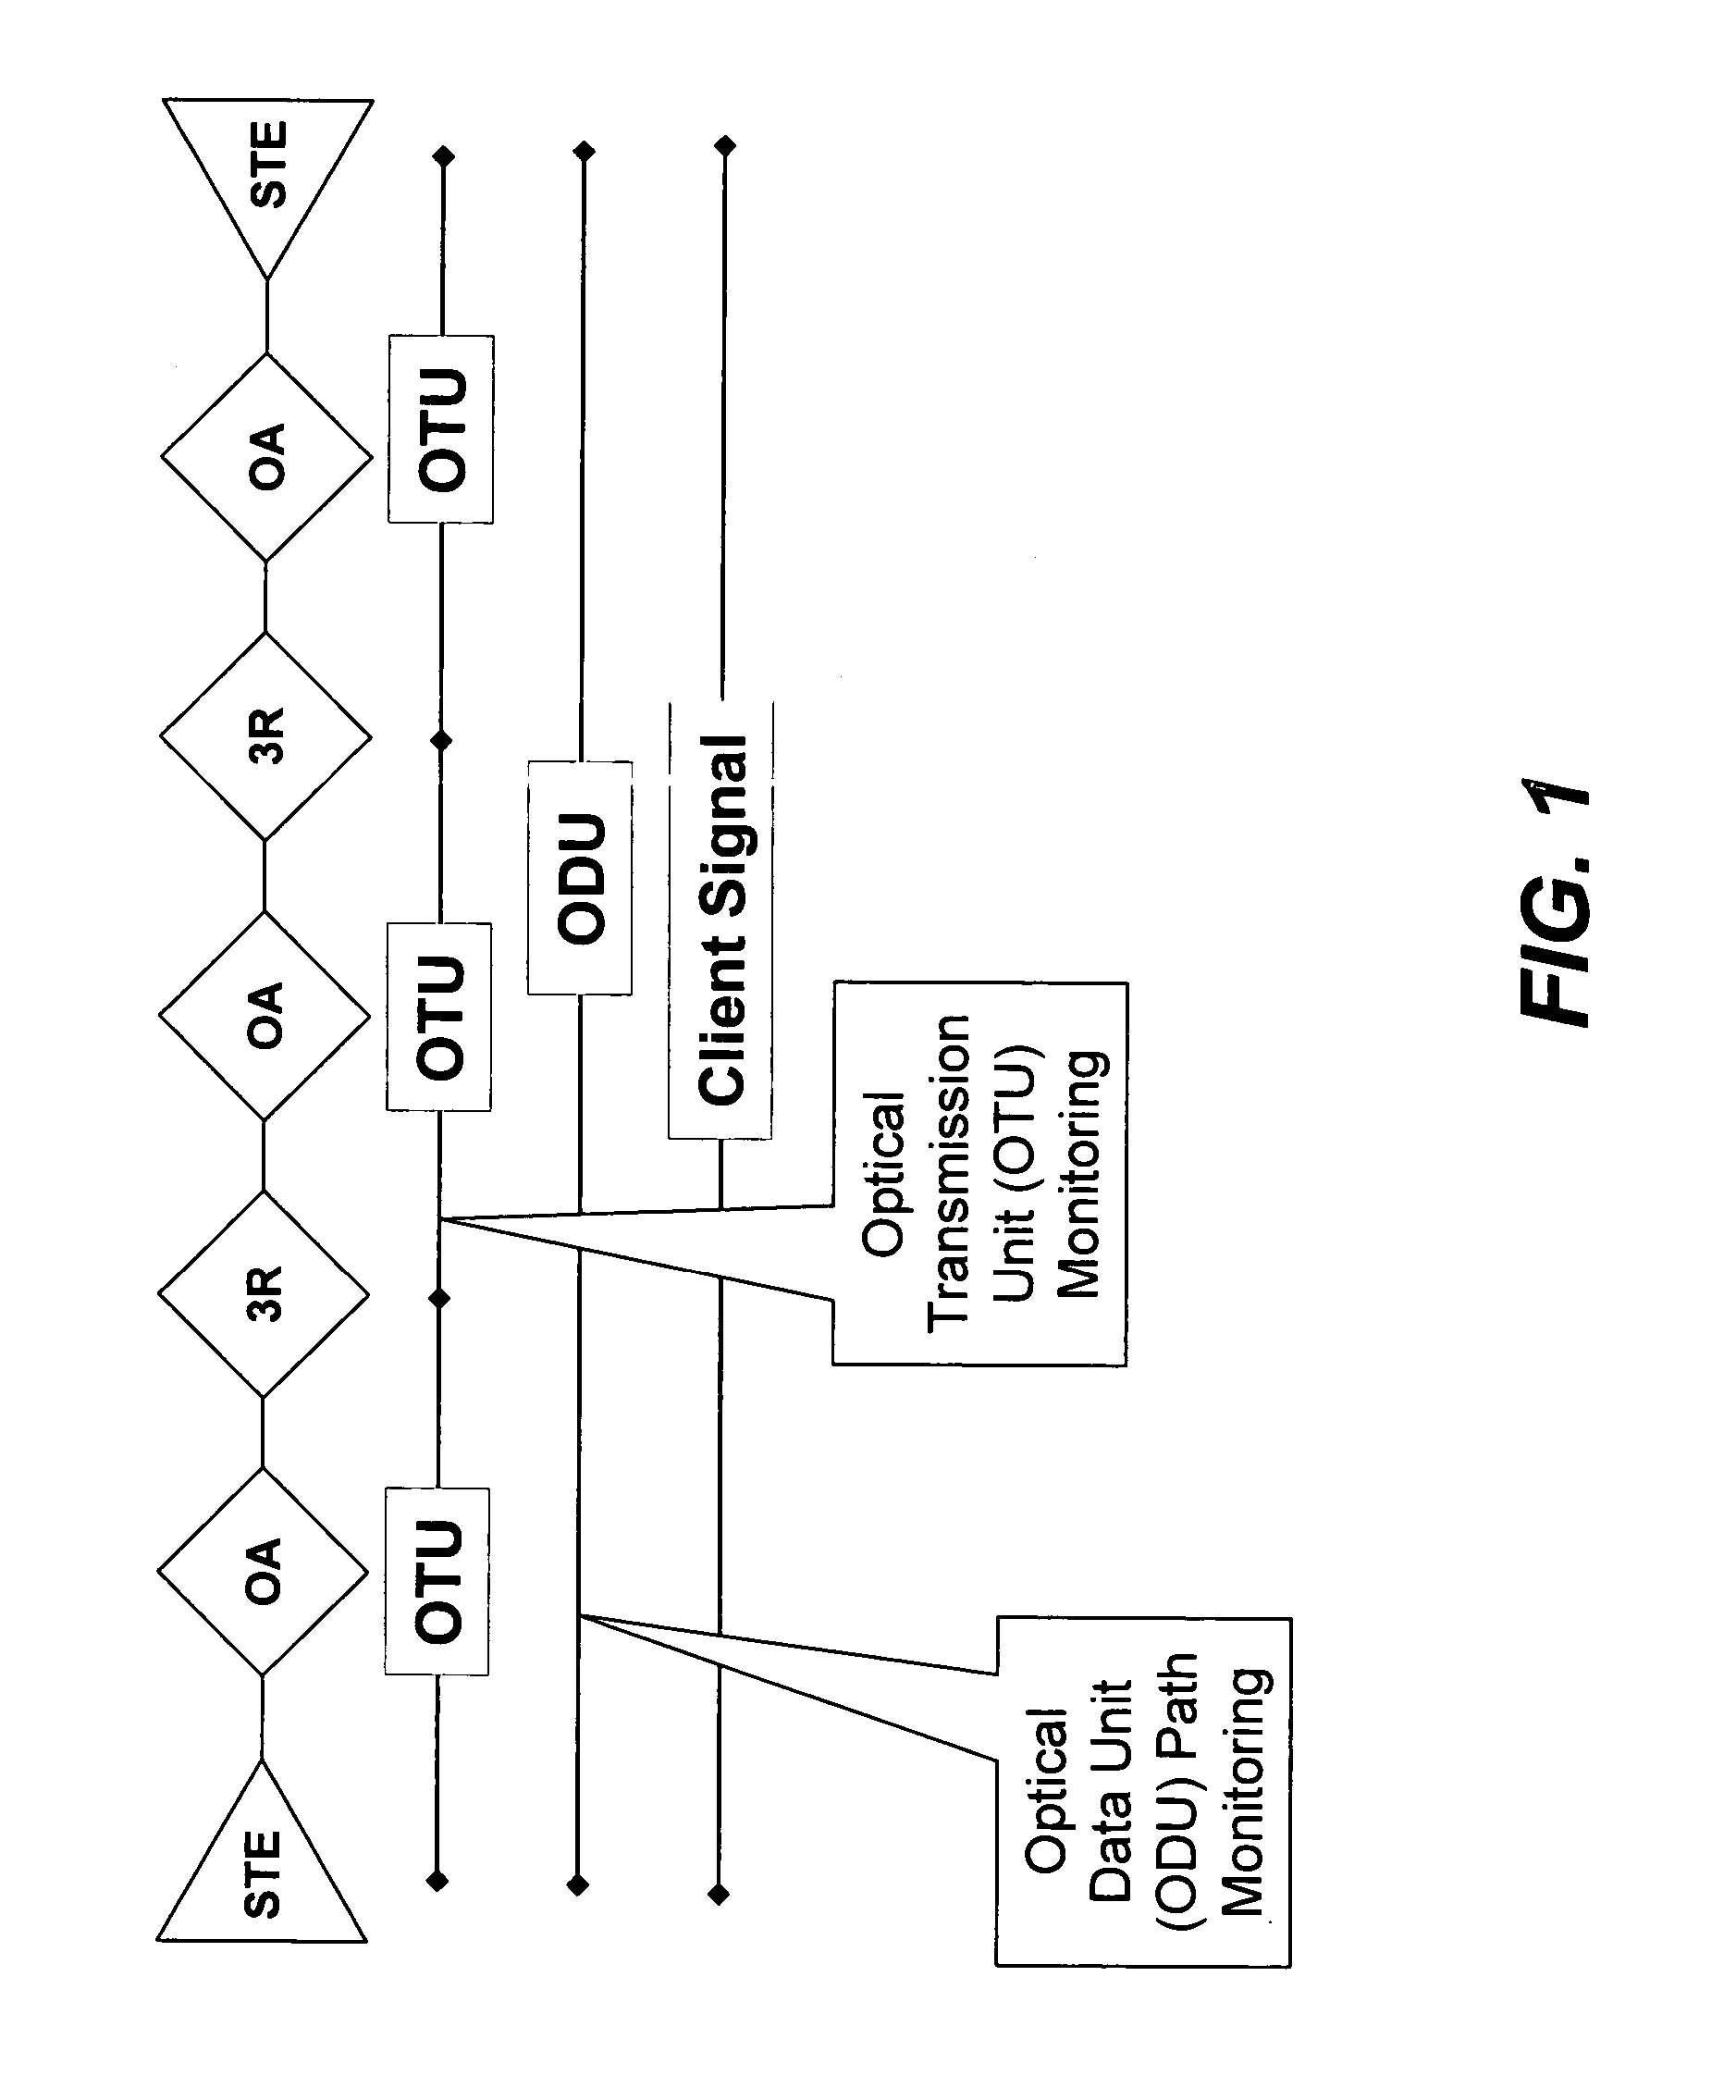 Optical transmission network with asynchronous mapping and demapping and digital wrapper frame for the same